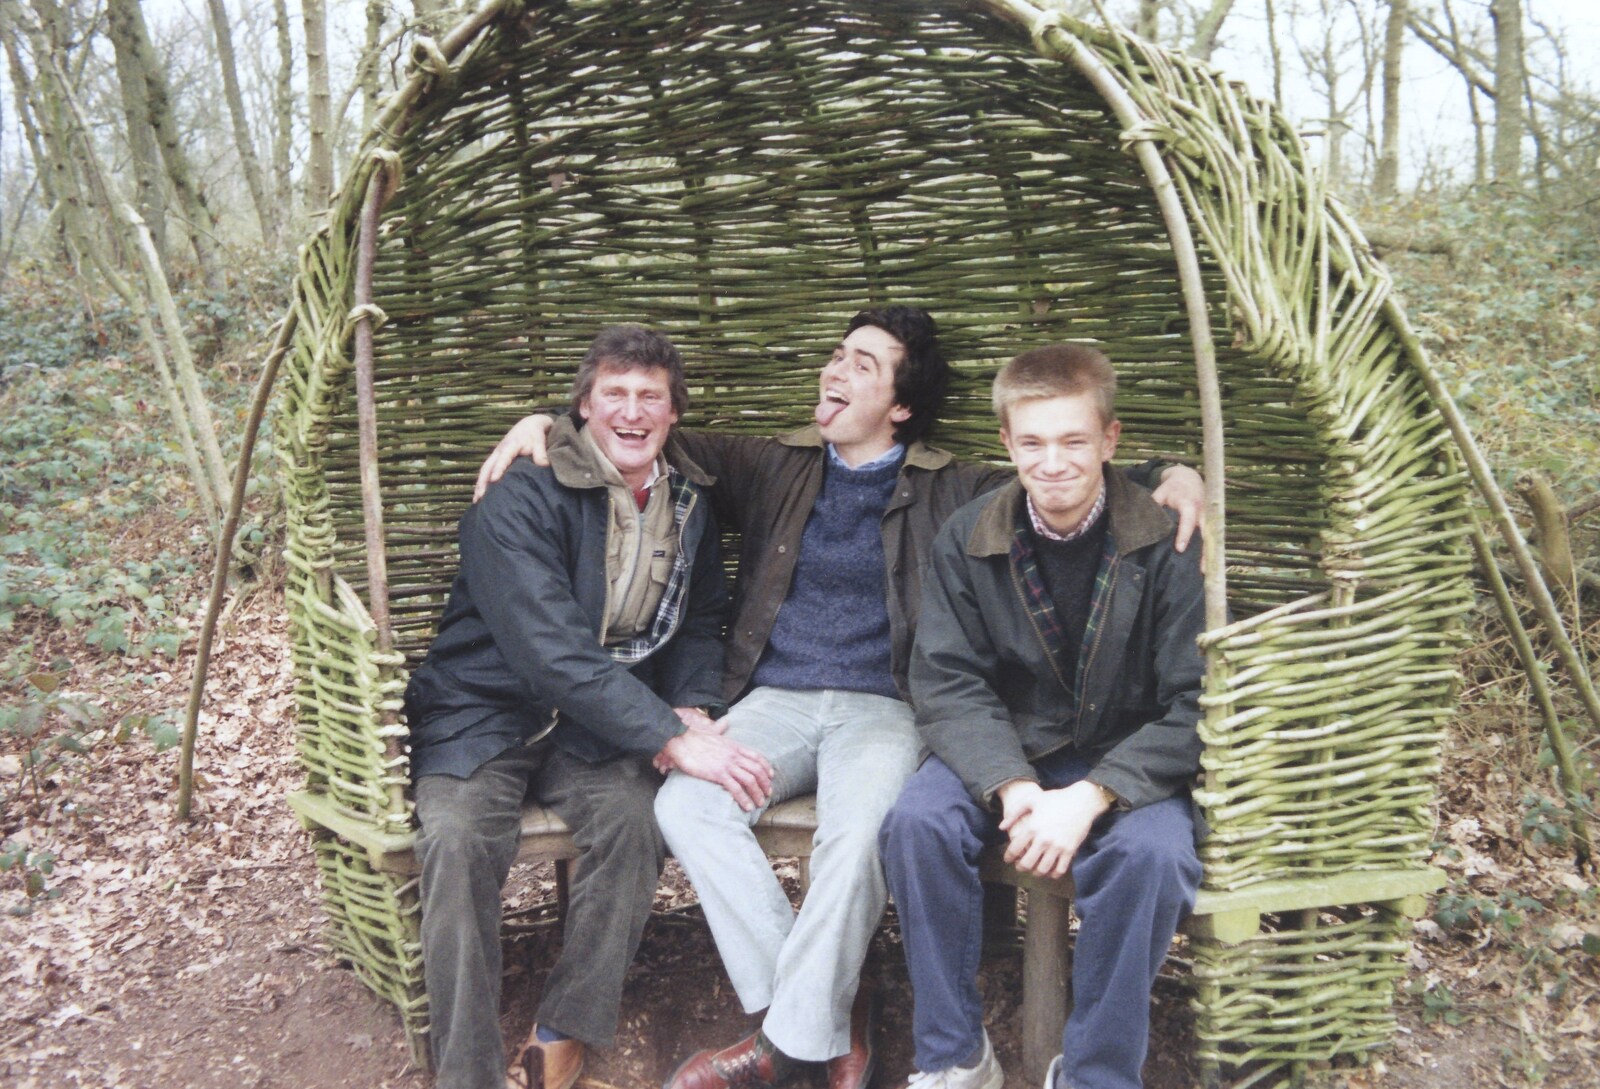 Geoff, David and Nosher from A Walk in Tyrrel's Wood, Pulham St. Mary, Norfolk - 23rd February 1991